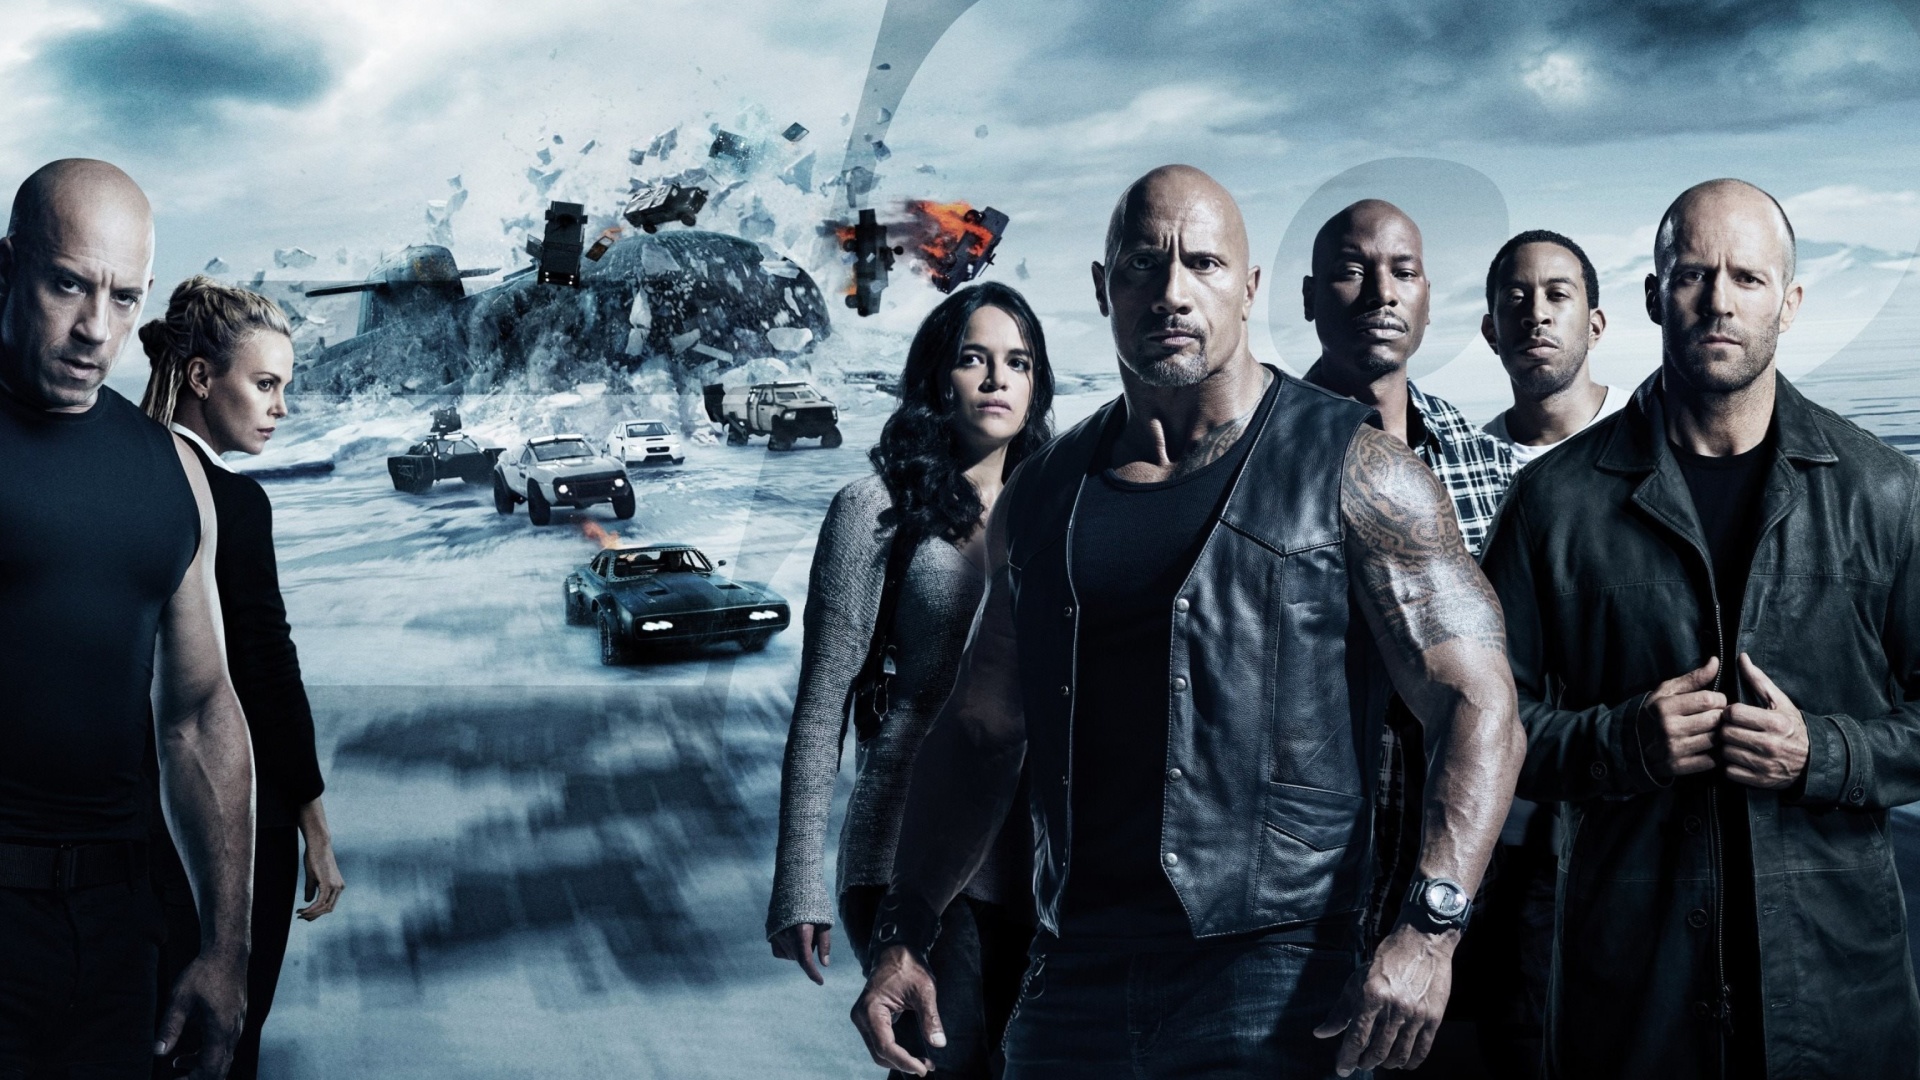 The Fate of the Furious with Vin Diesel, Dwayne Johnson, Charlize Theron wallpaper 1920x1080